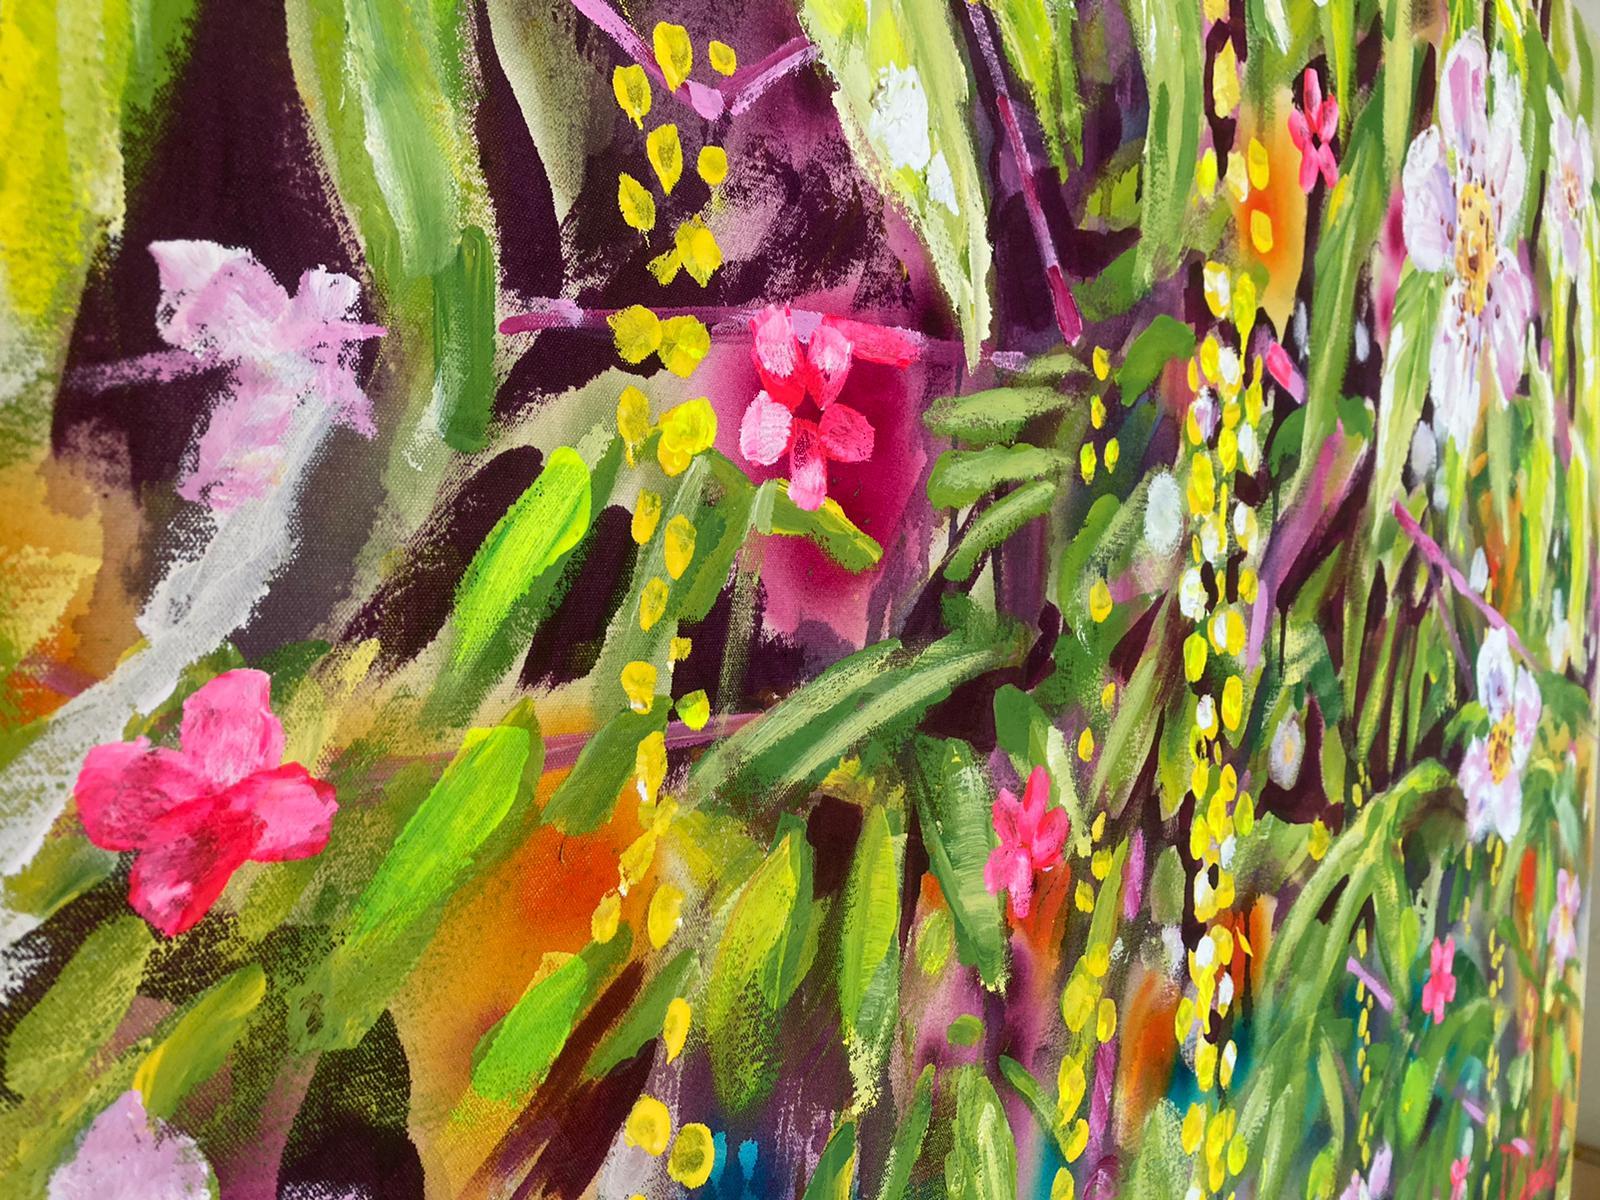 Taking time to blossom by Rachael Dalzell, acrylic on canvas 2